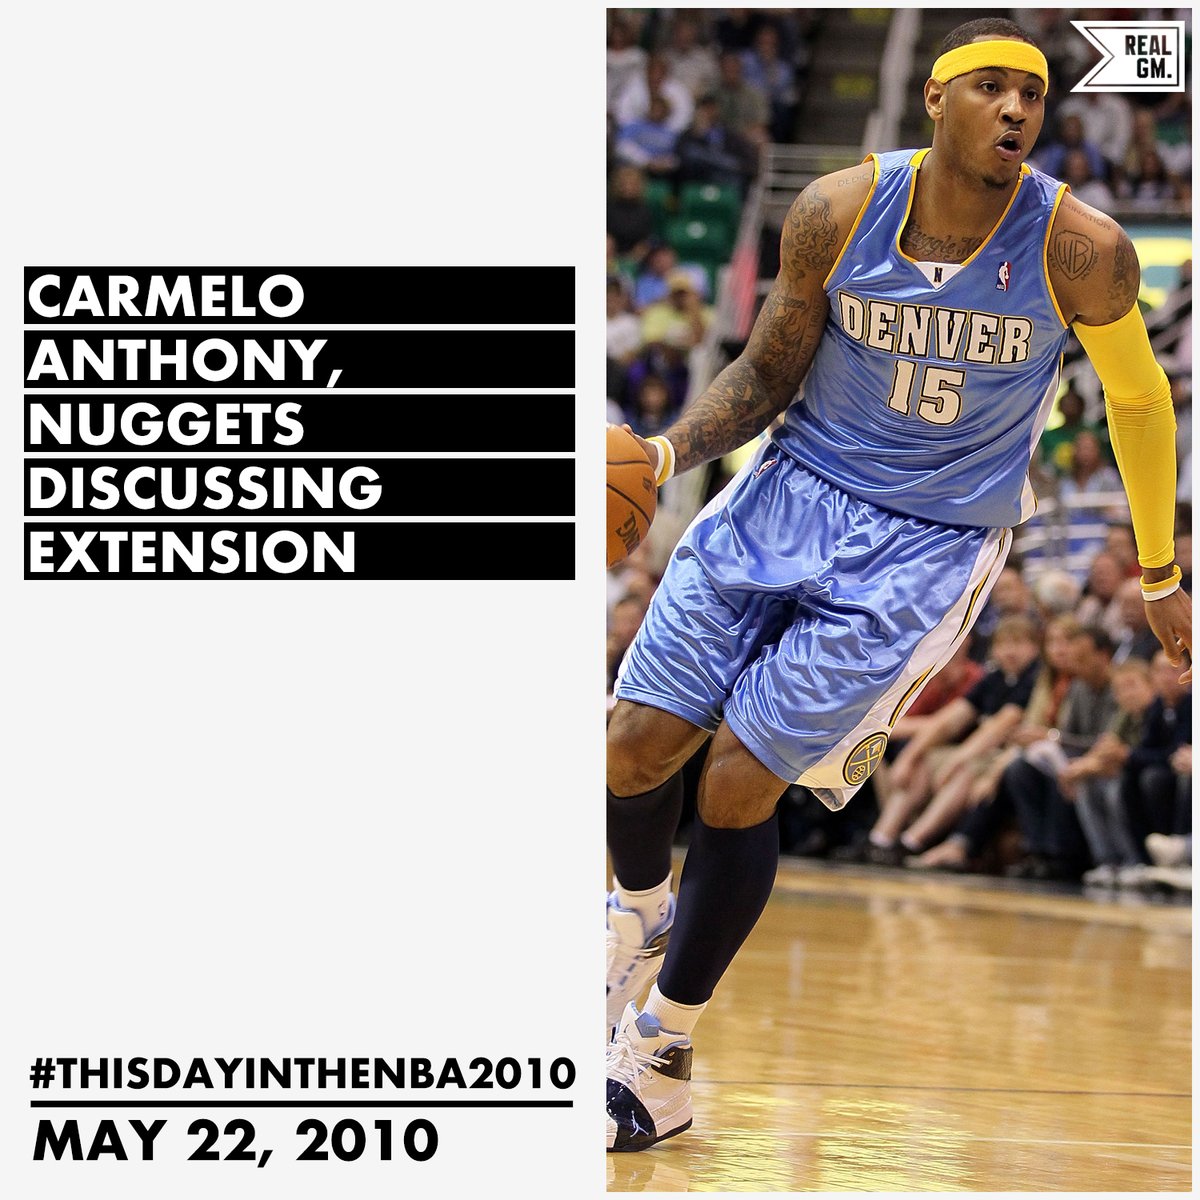  #ThisDayInTheNBA2010May 22, 2010Carmelo Anthony, Nuggets Discussing Extension https://basketball.realgm.com/wiretap/204059/Carmelo-Anthony-Nuggets-Discussing-Extension